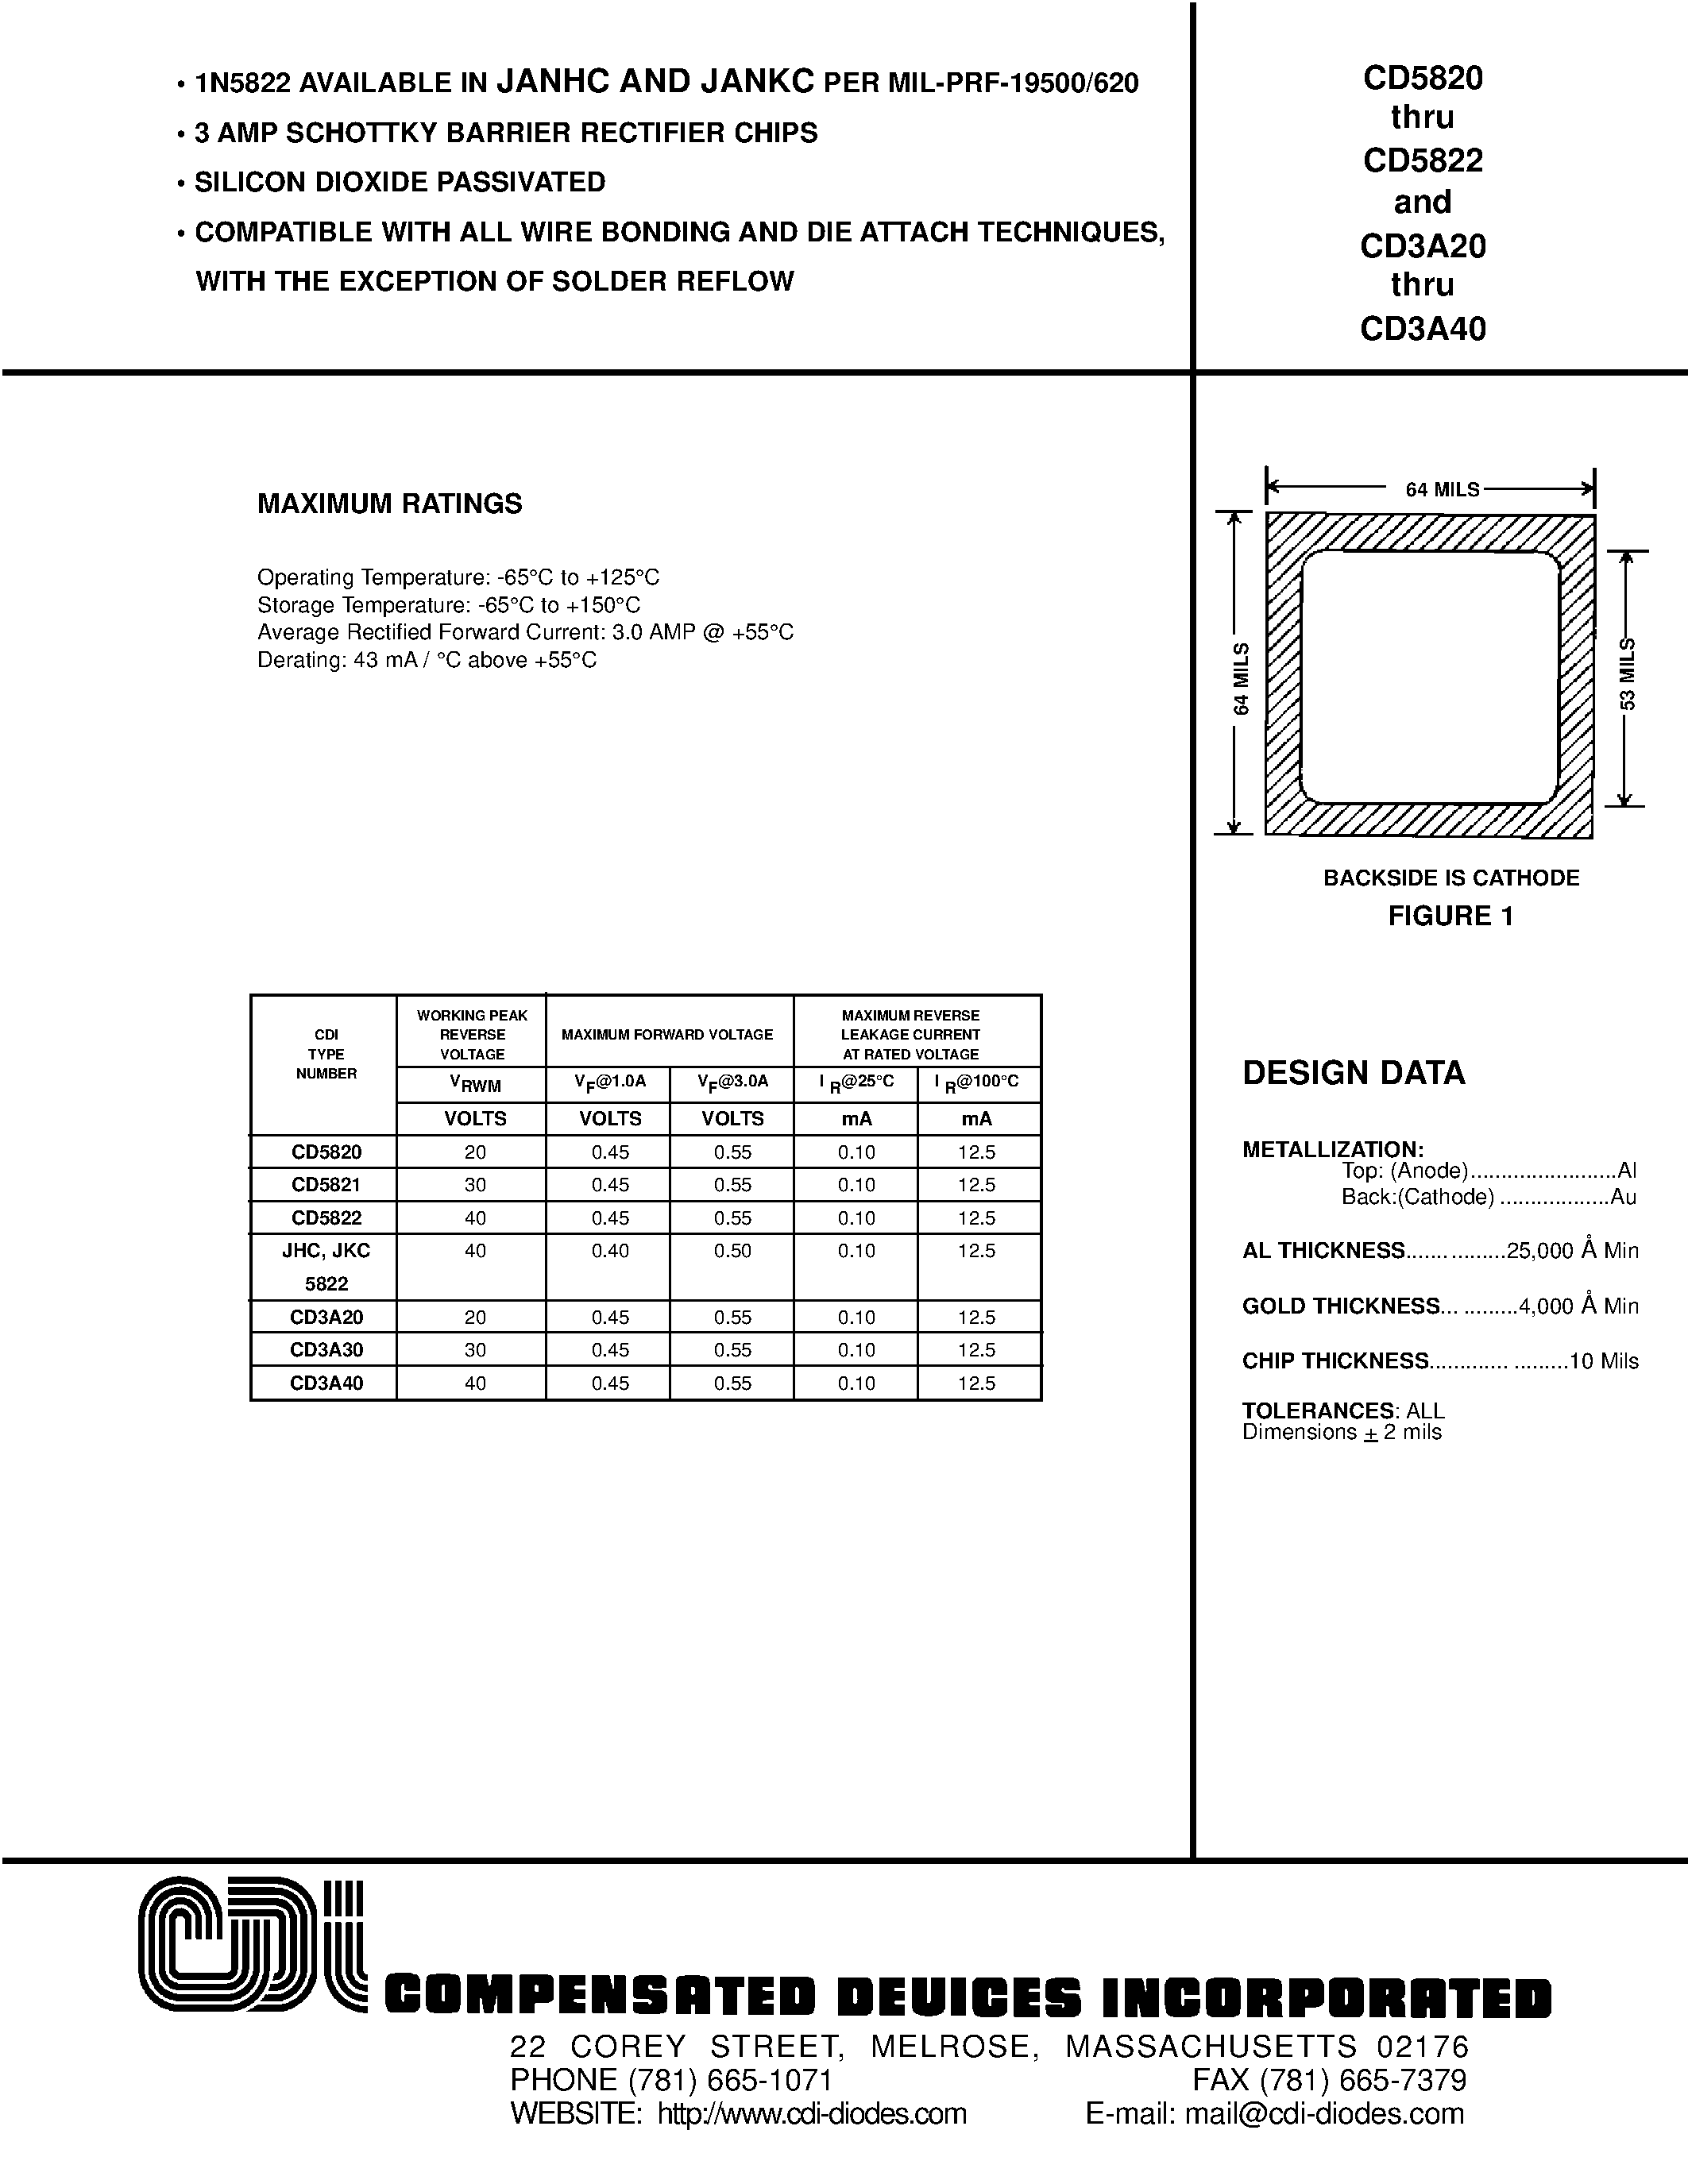 Datasheet CD5822 - SILICON DIOXIDE PASSIVATED page 1